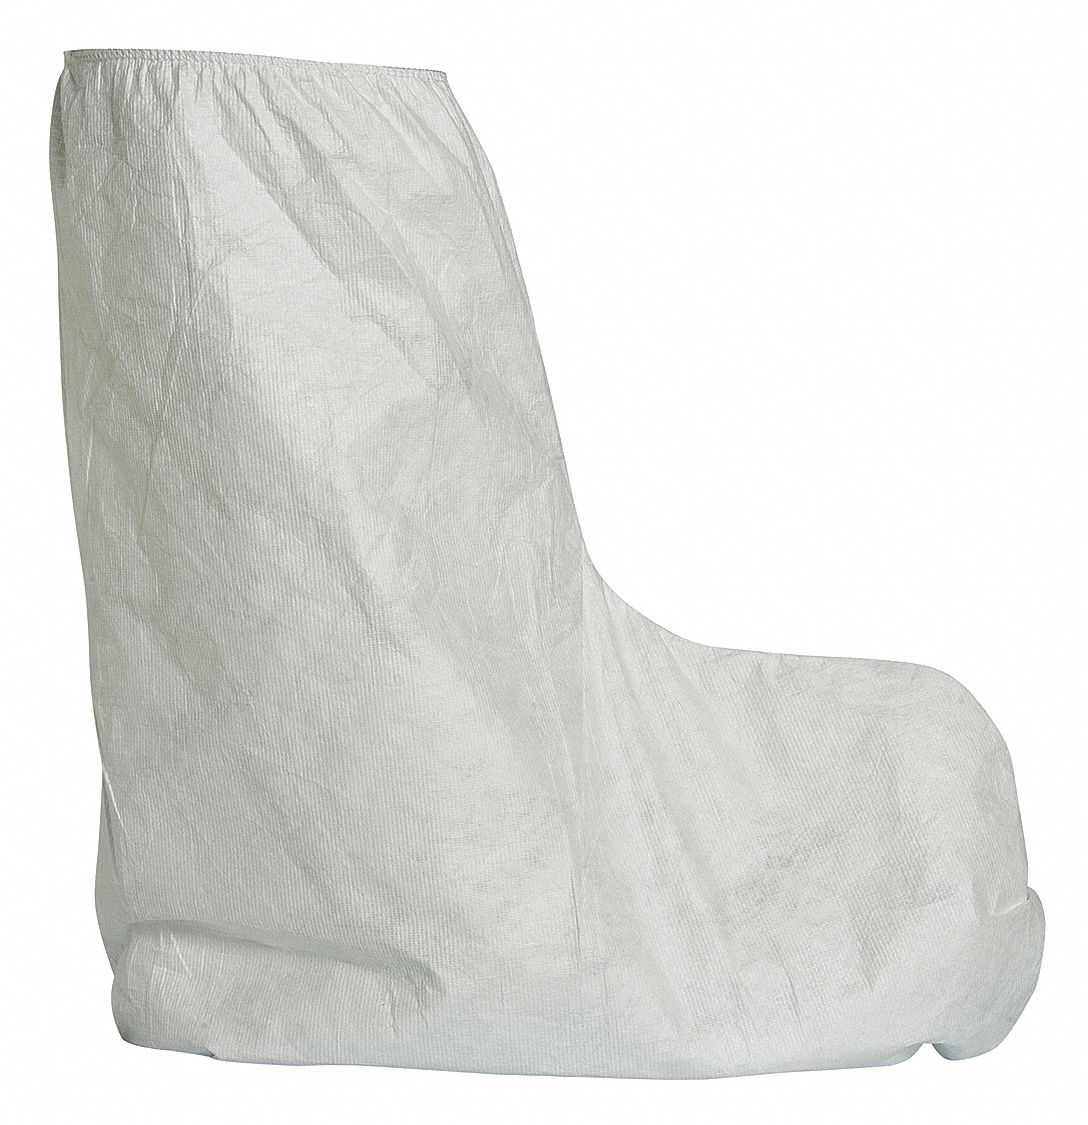 M Shoe Covers, Slip Resistant Sole: Yes, Waterproof: Yes, 18" Height